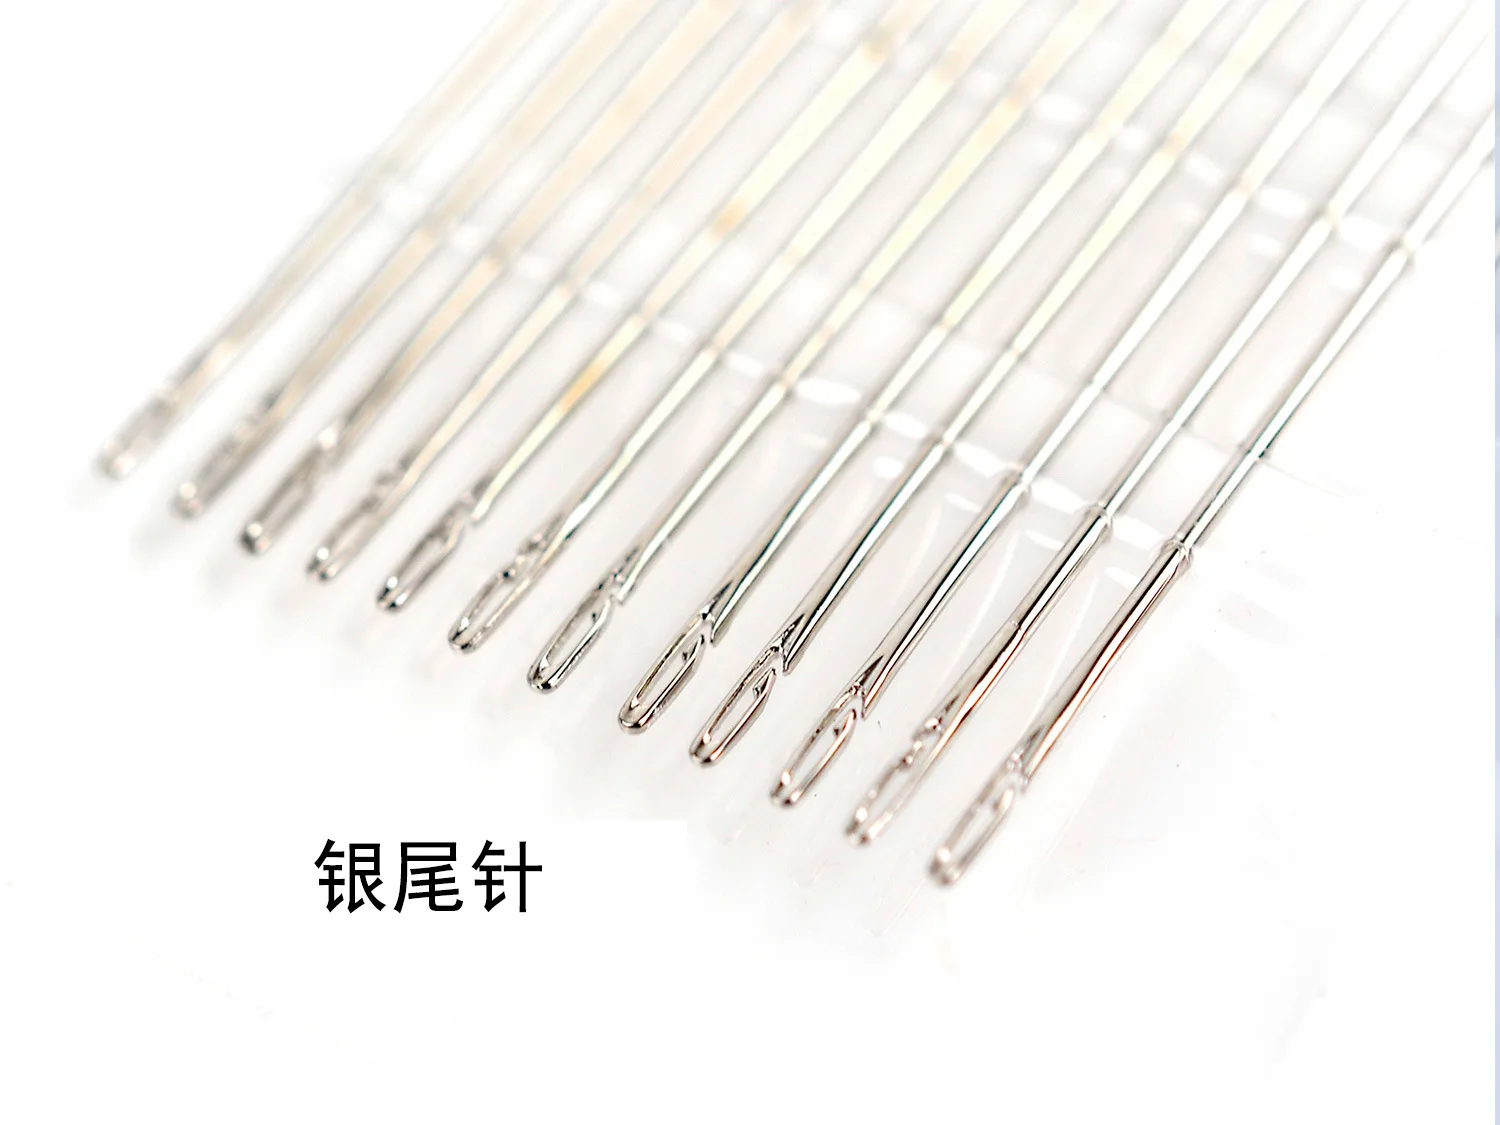 

12pcs Hand Sewing Easy Use one second multi-size Needles Stitches No Threading Household Tools Side opening Users friendly blind